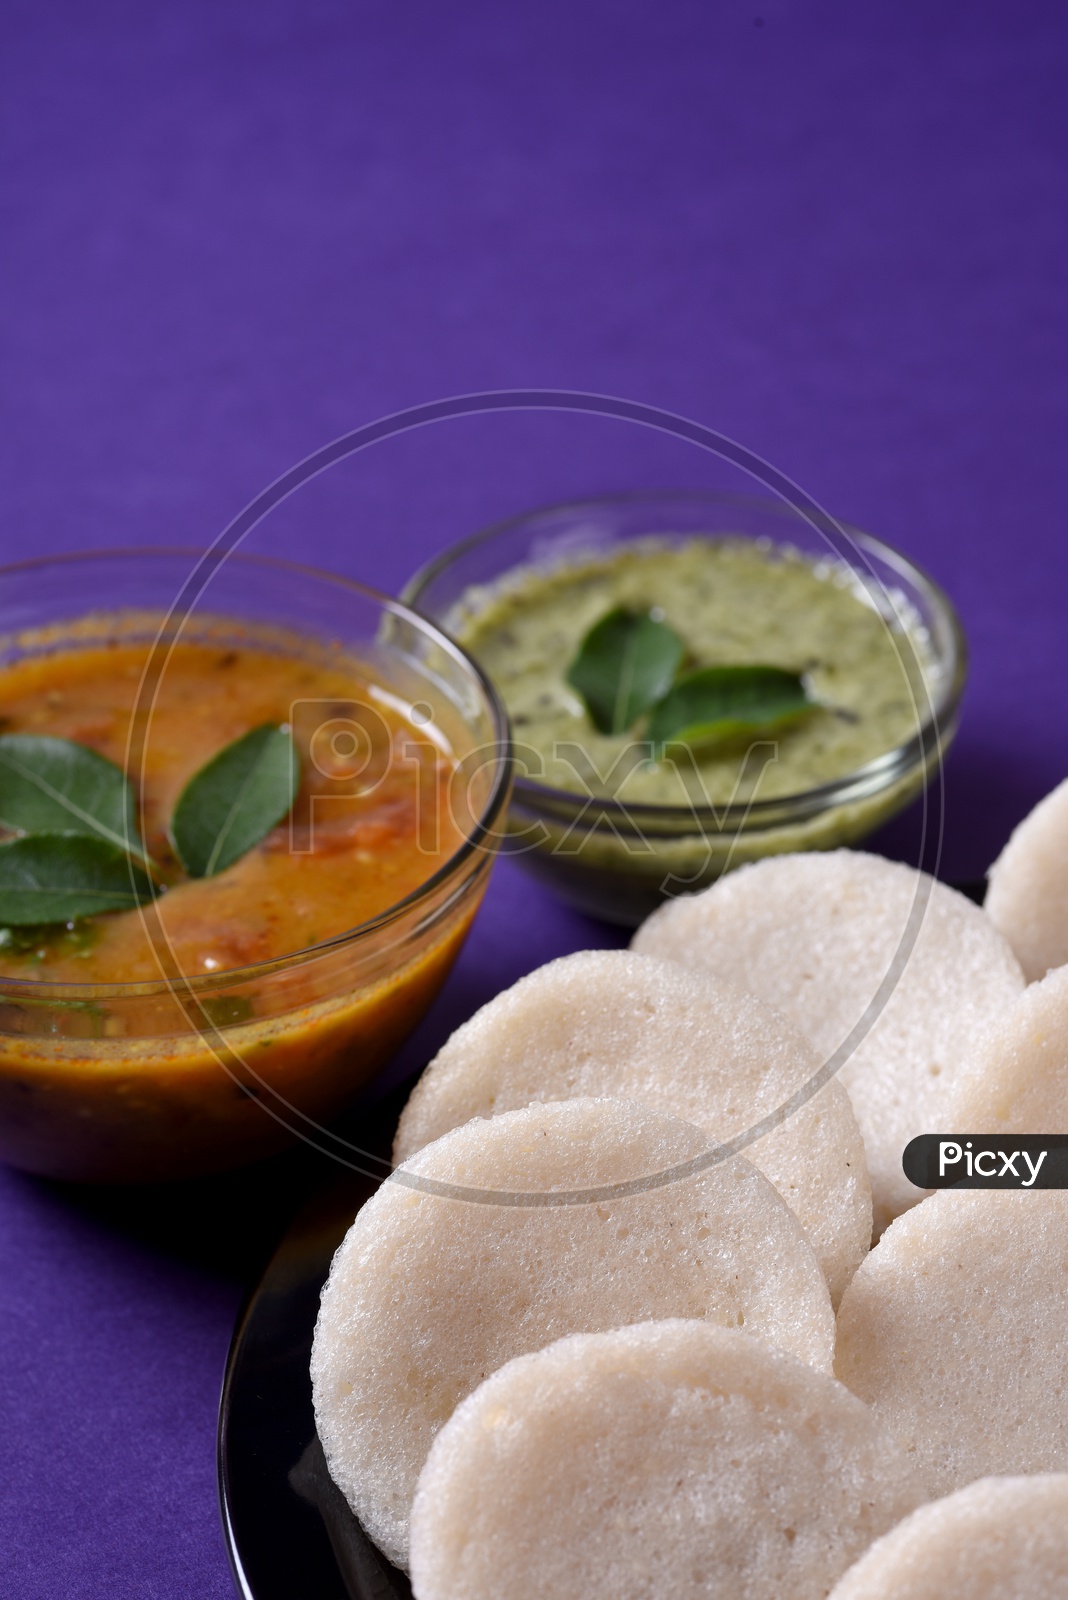 Idli served with sambar and coconut chutney on violet background